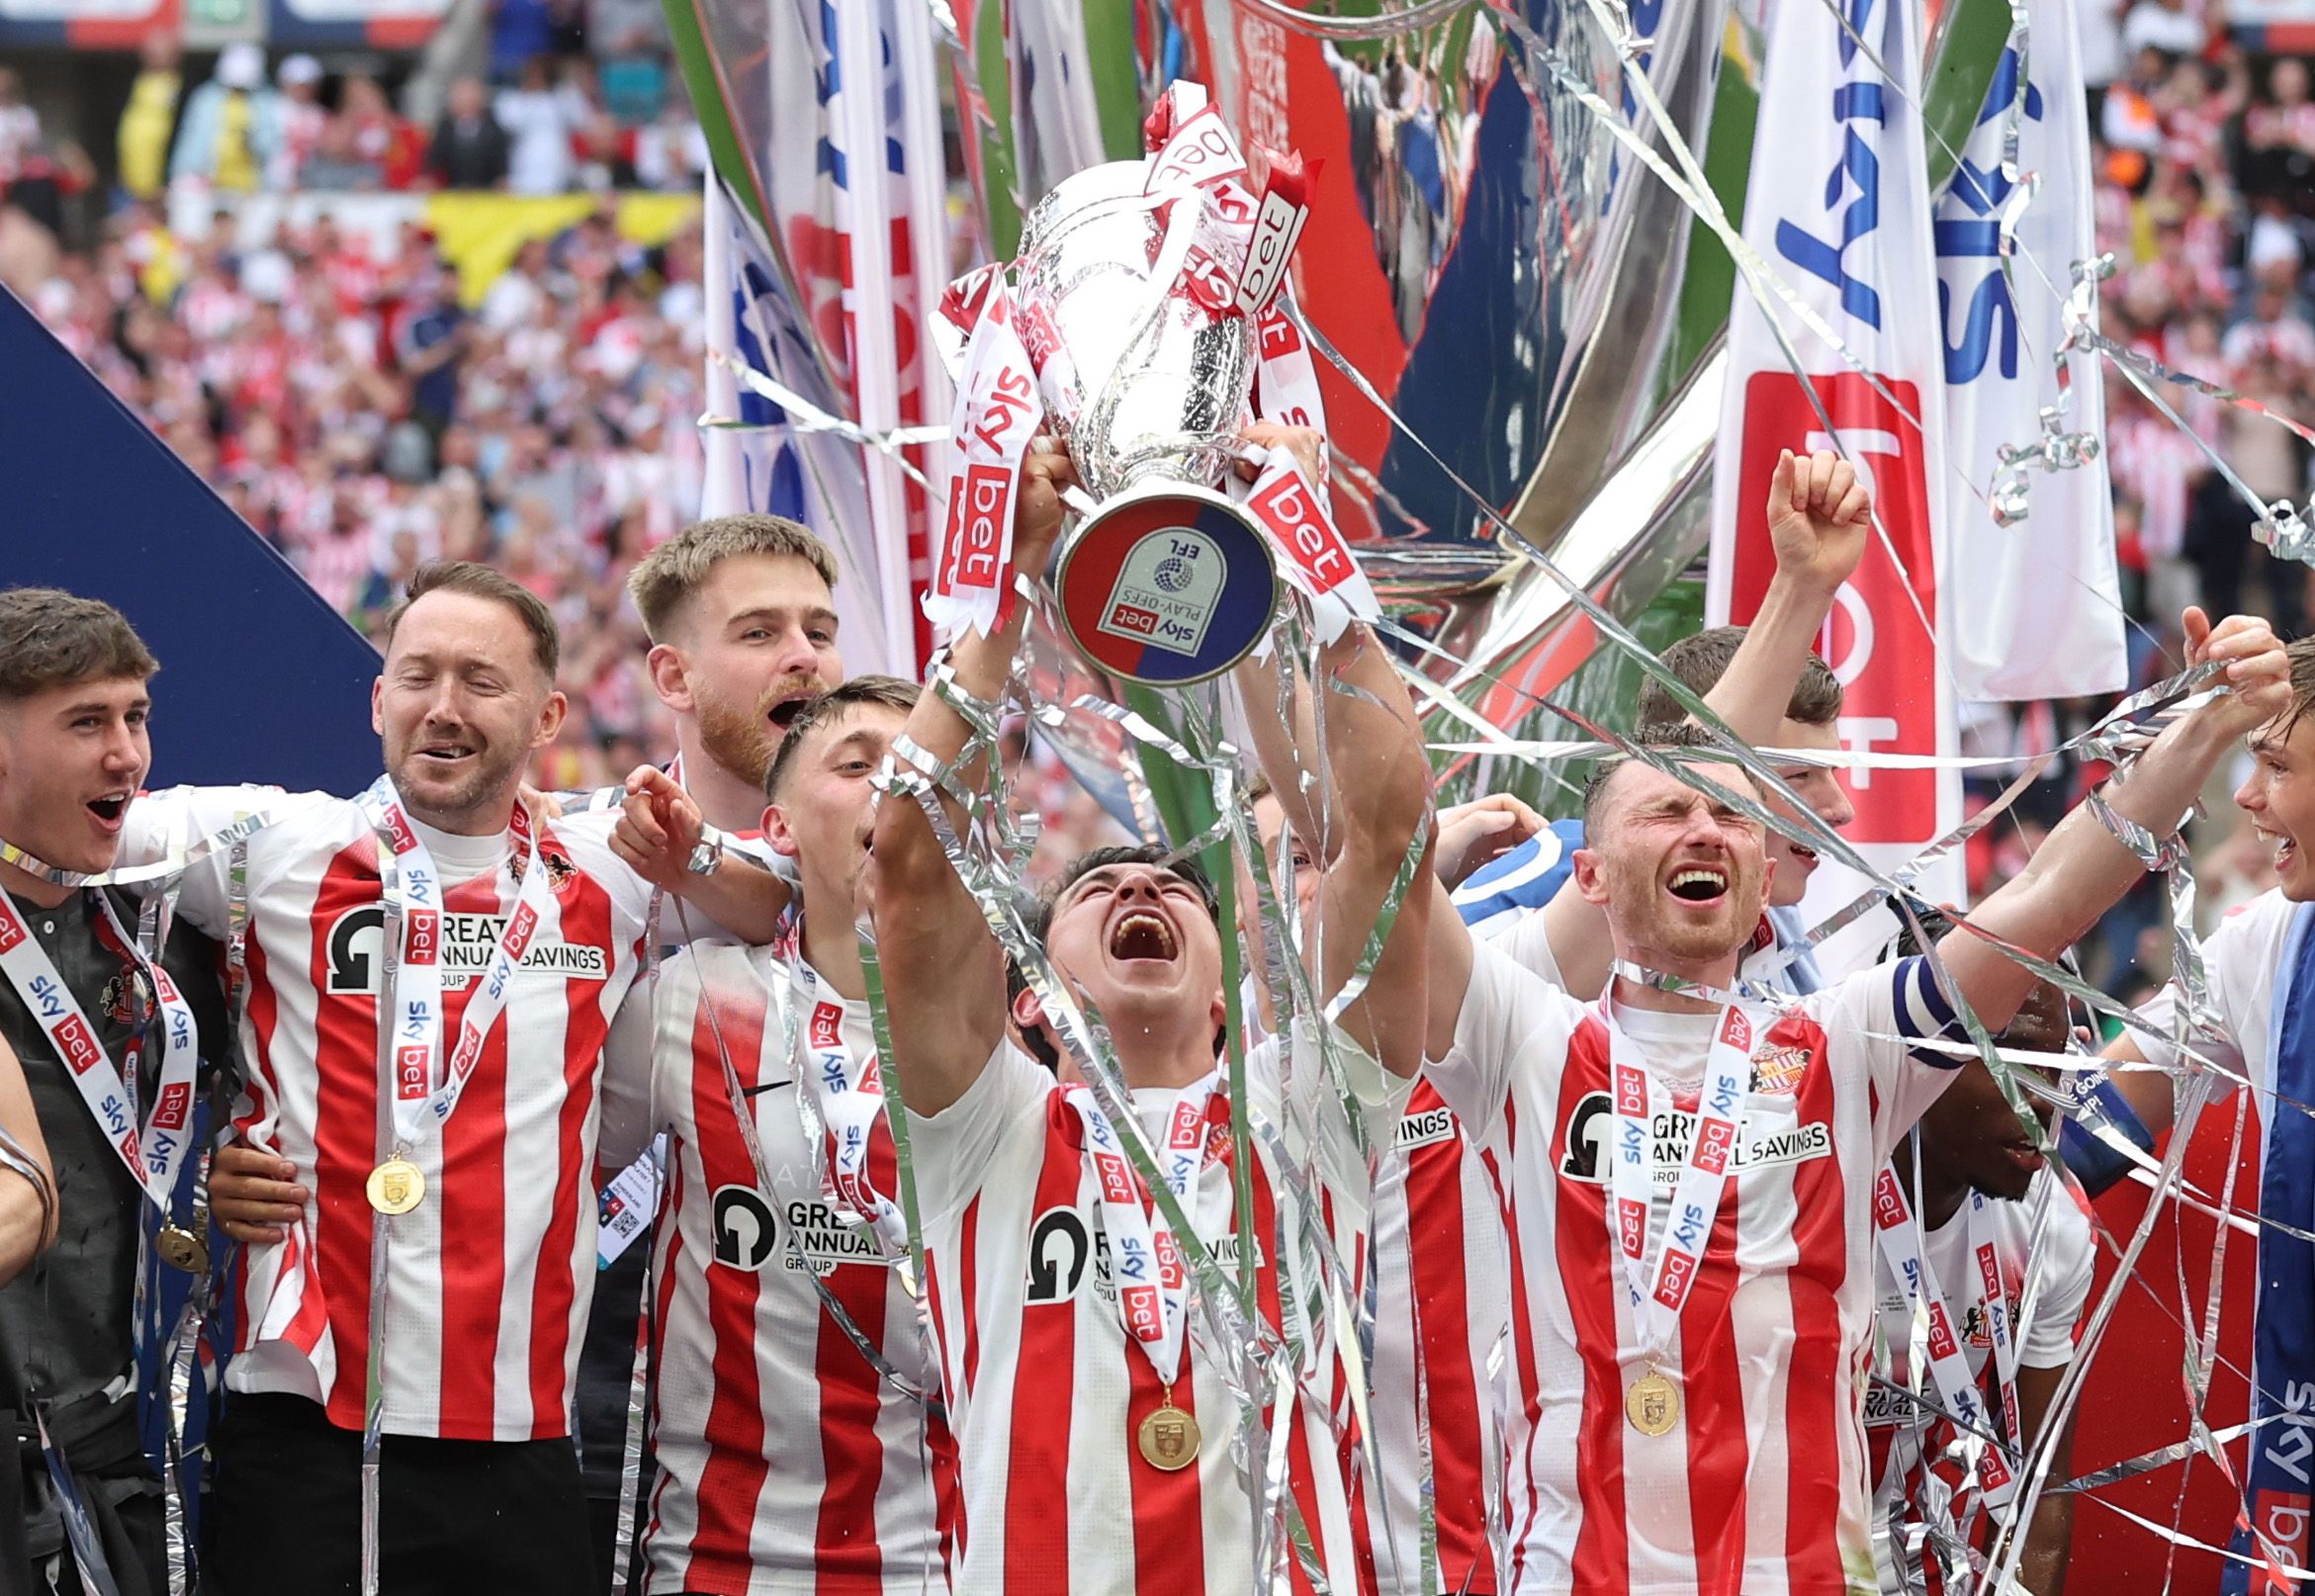 Soccer Football - League One Play-Off Final - Sunderland v Wycombe Wanderers - Wembley Stadium, London, Britain - May 21, 2022  Sunderland's Luke O'Nien celebrates with the trophy and teammates after winning the League One Play-Off Action Images/Matthew Childs EDITORIAL USE ONLY. No use with unauthorized audio, video, data, fixture lists, club/league logos or 'live' services. Online in-match use limited to 75 images, no video emulation. No use in betting, games or single club /league/player publ